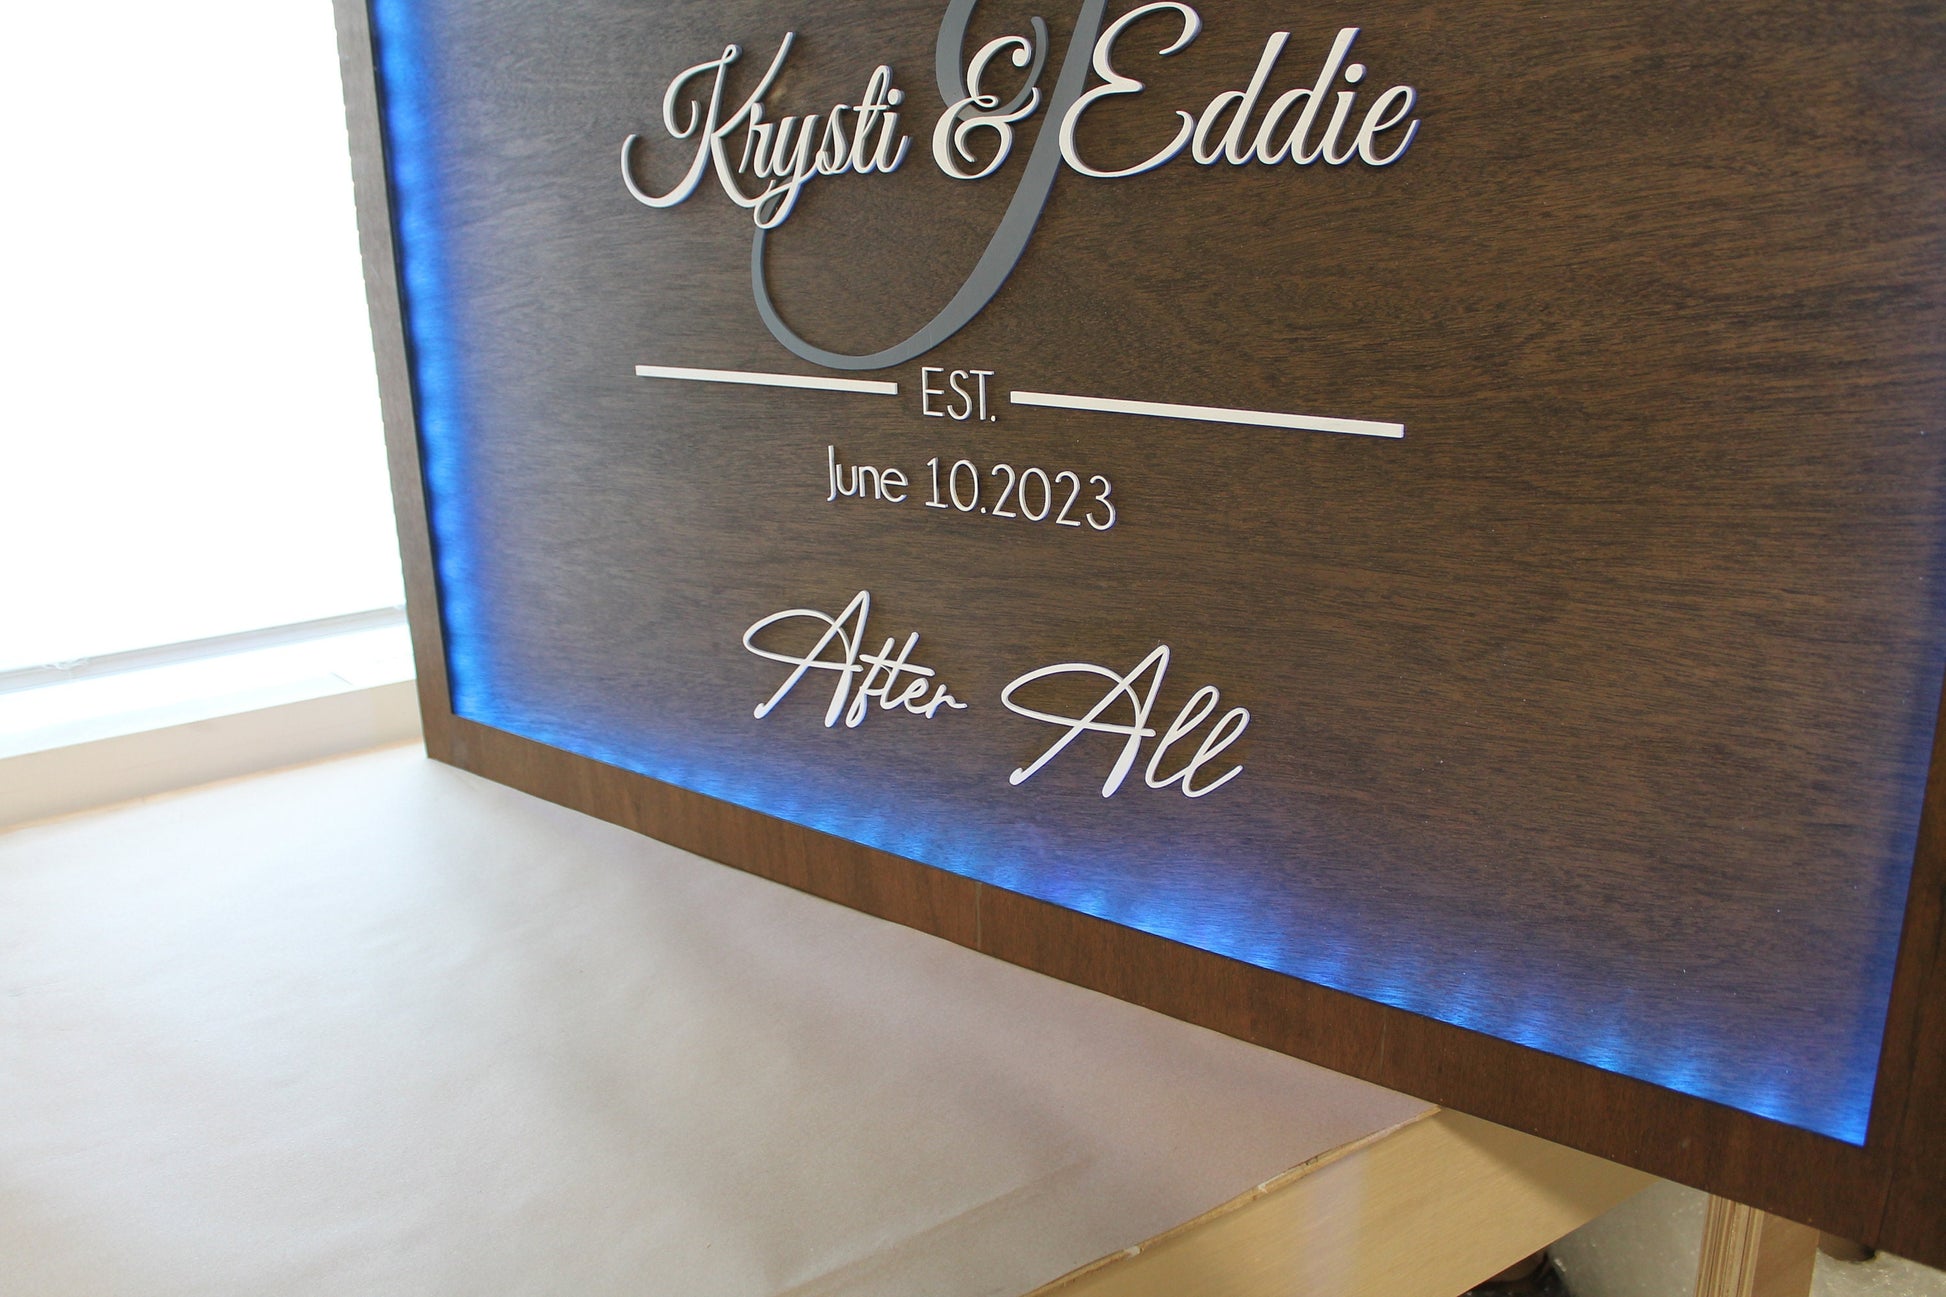 Custom Wood Lit Wedding Sign, Personalized, Party, LED, Entrance Light, Remote, Electric, Light Up, Use your Logo, Wood, Wooden